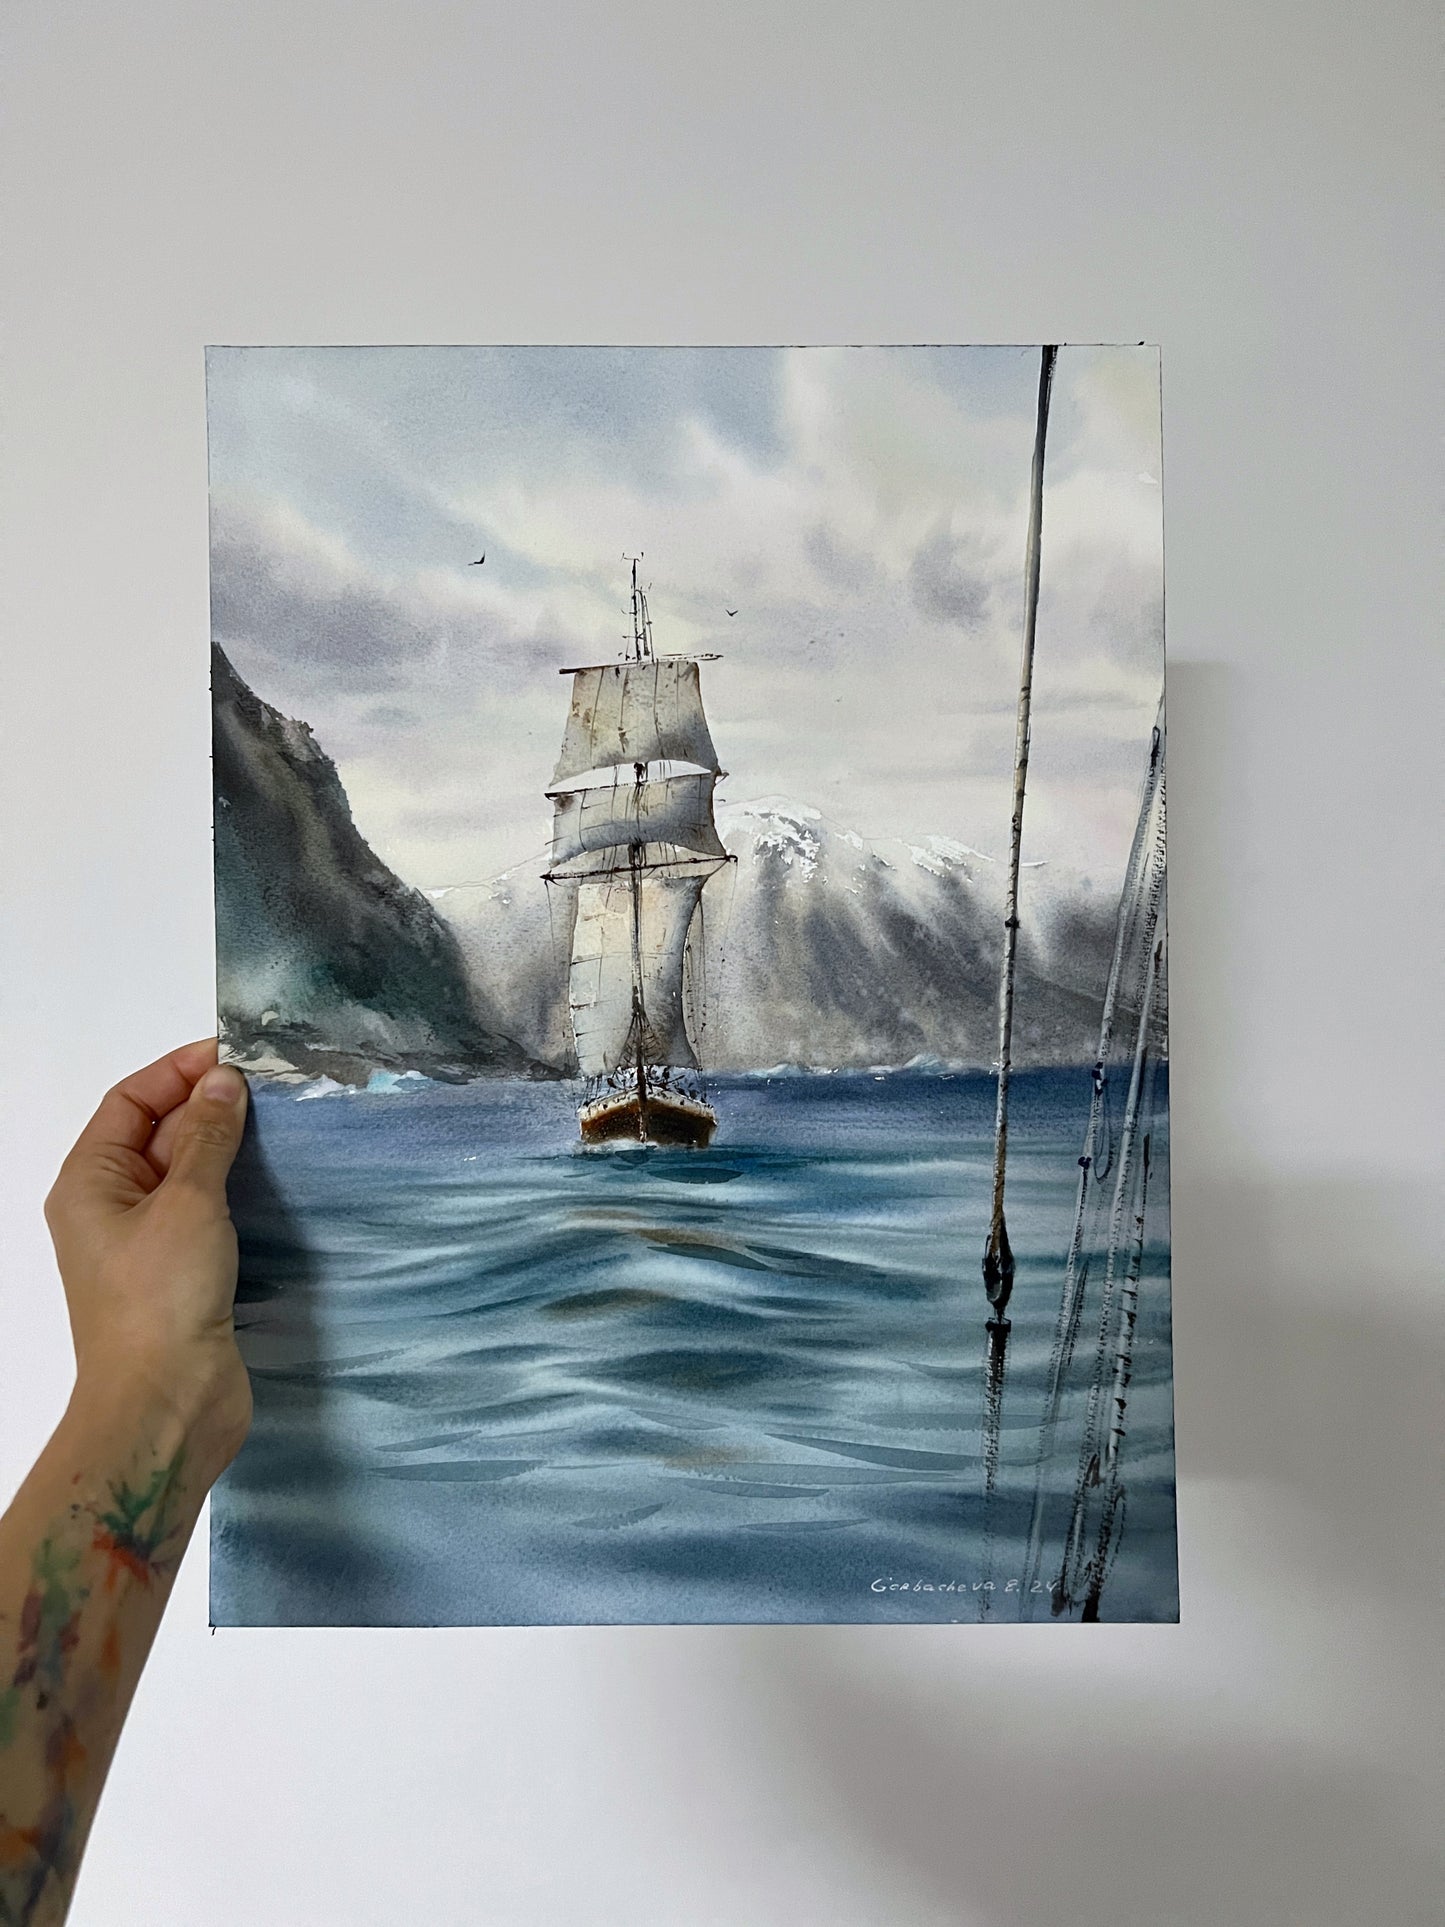 Arctic Painting Original Watercolor, Seascape with Sailing Ship - Greenland #7